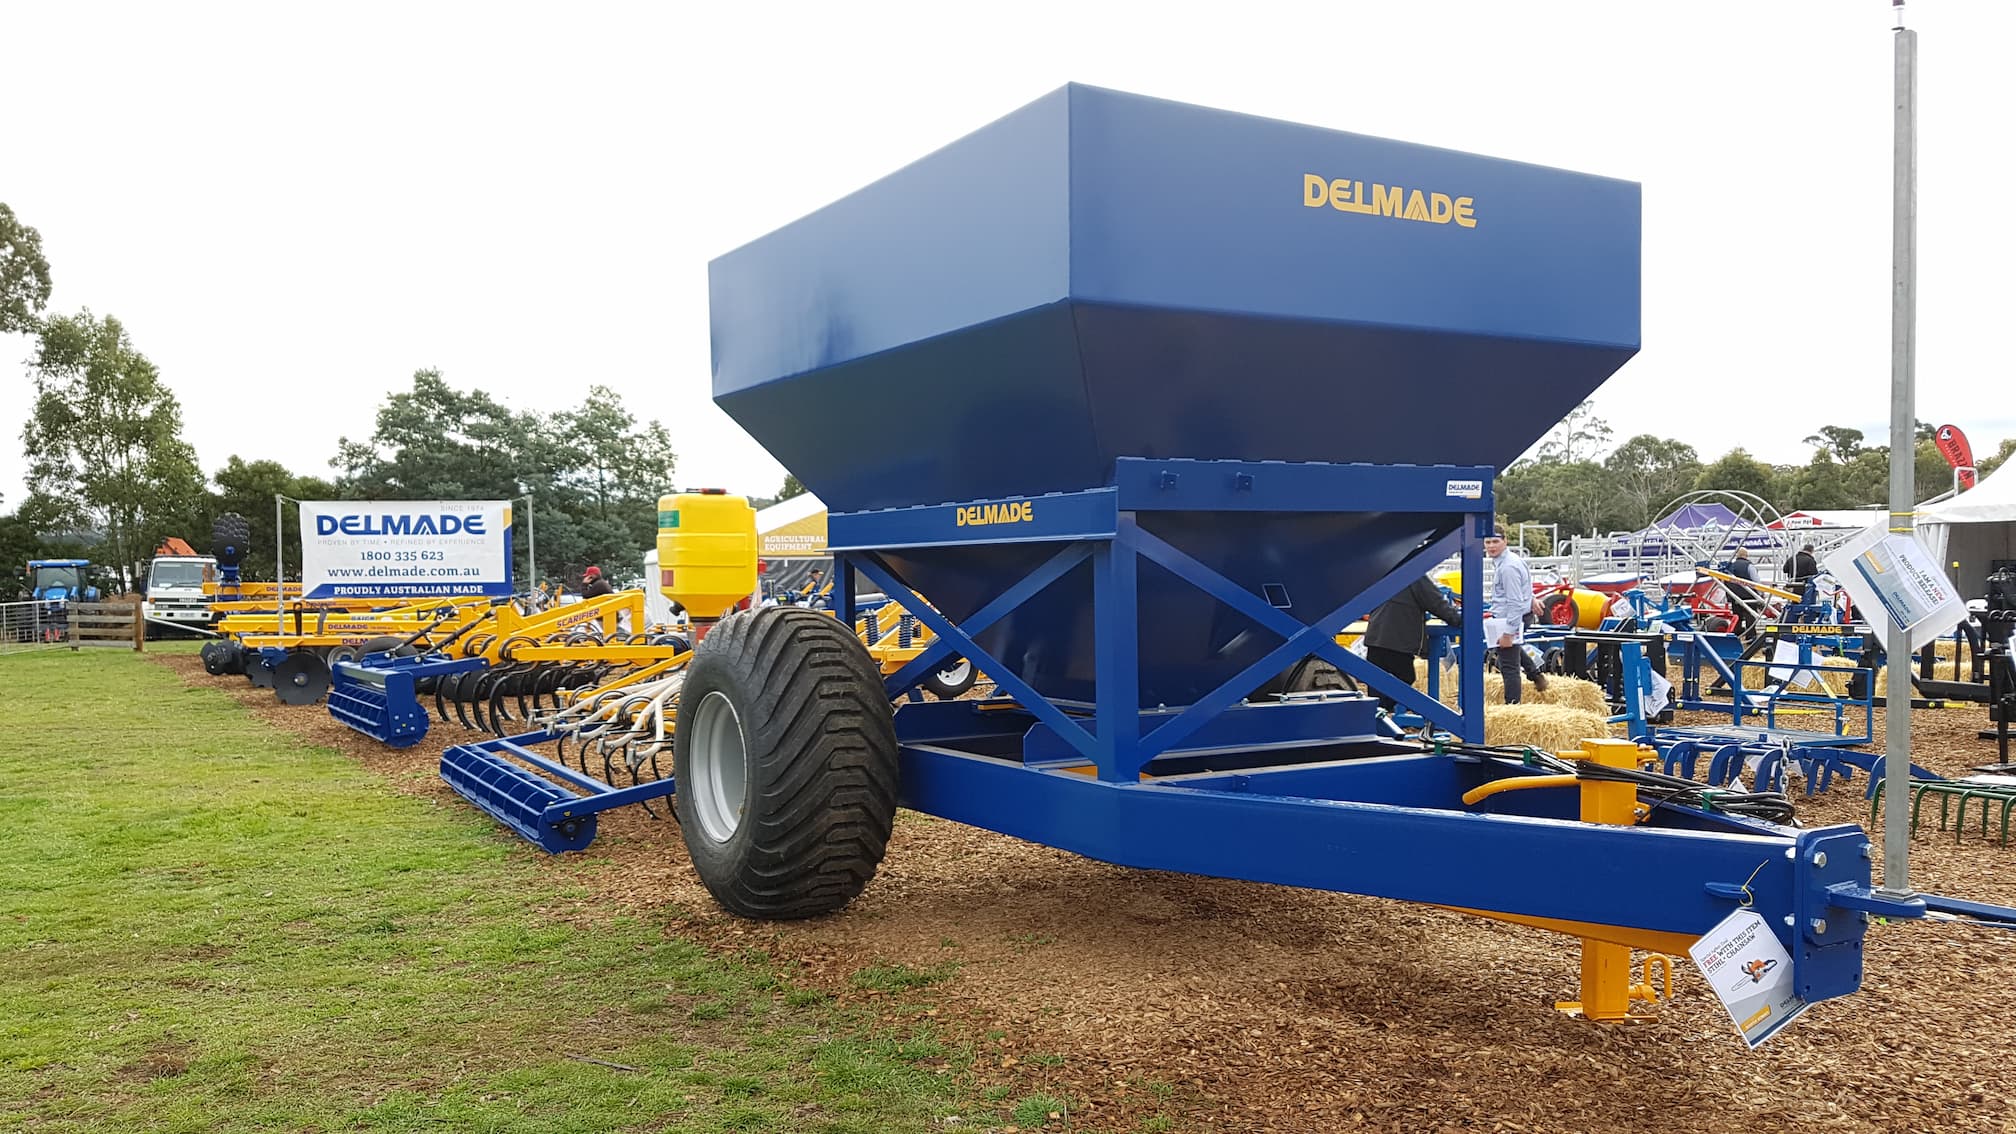 Delmade at Agfest 2019.  Some Equipment on display including the Delmade Rut Filler, Disc, Cultivators and Crumblers